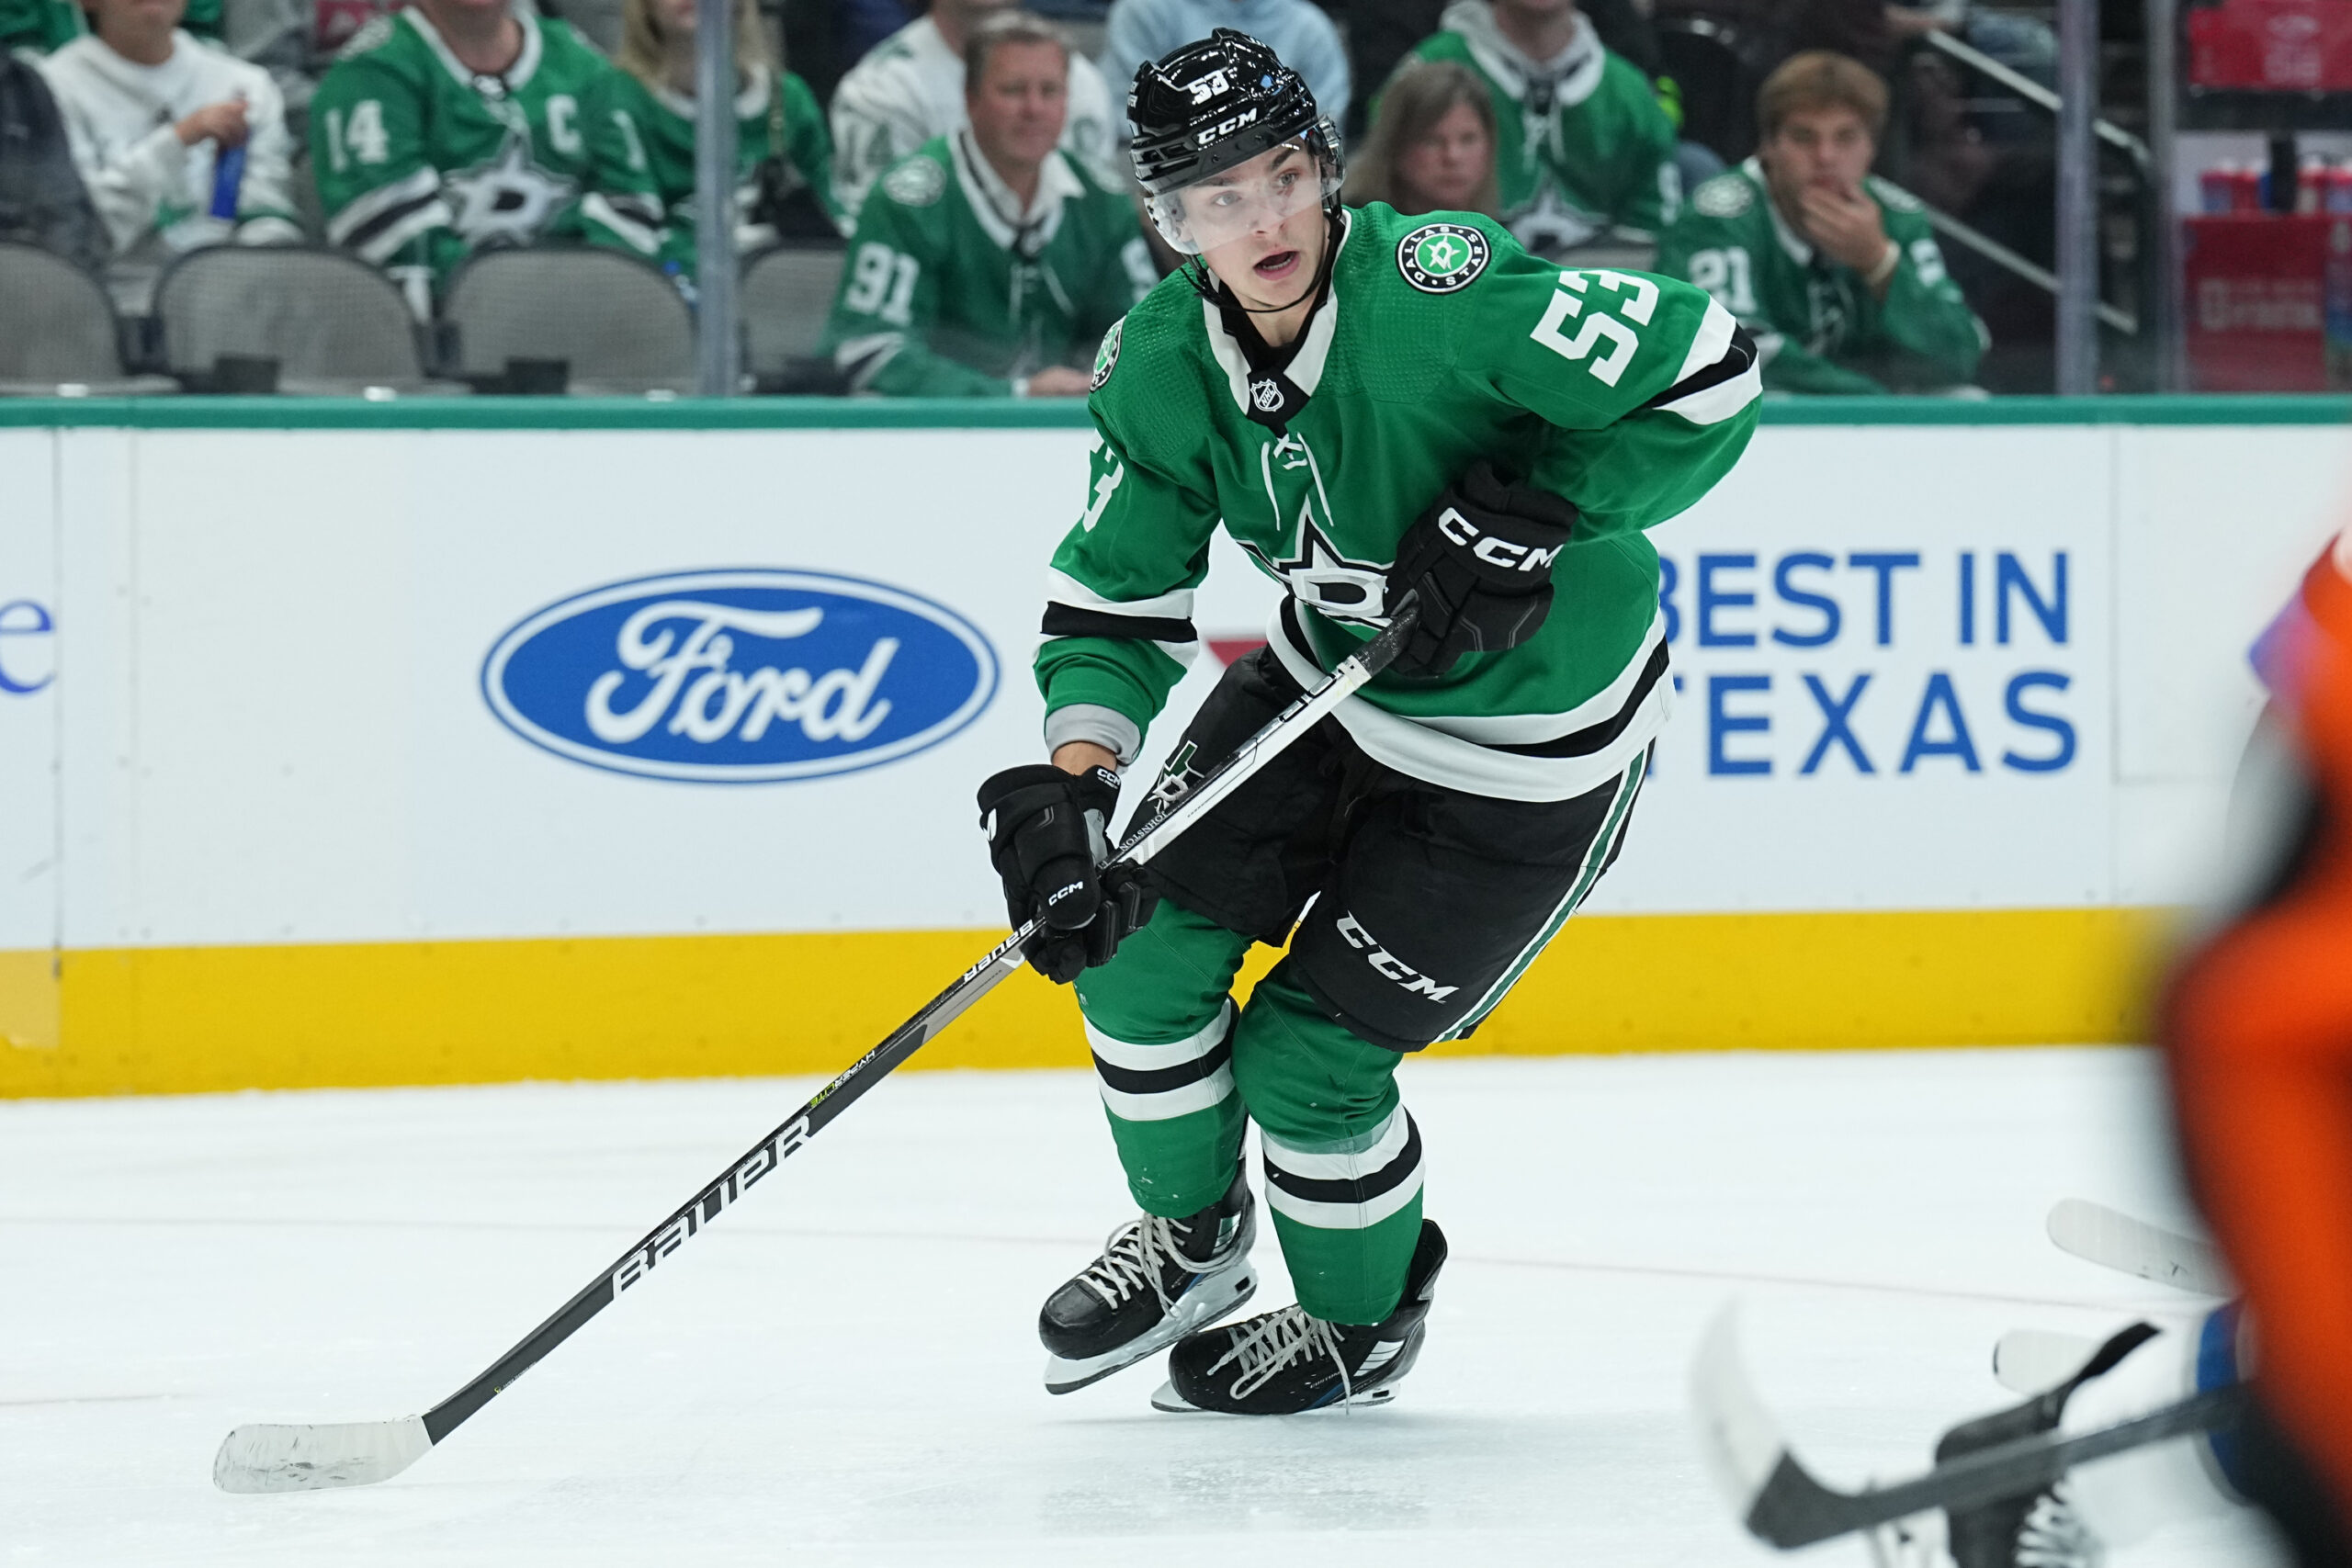 Stars Take First Series Lead in 3-2 Win vs. Golden Knights